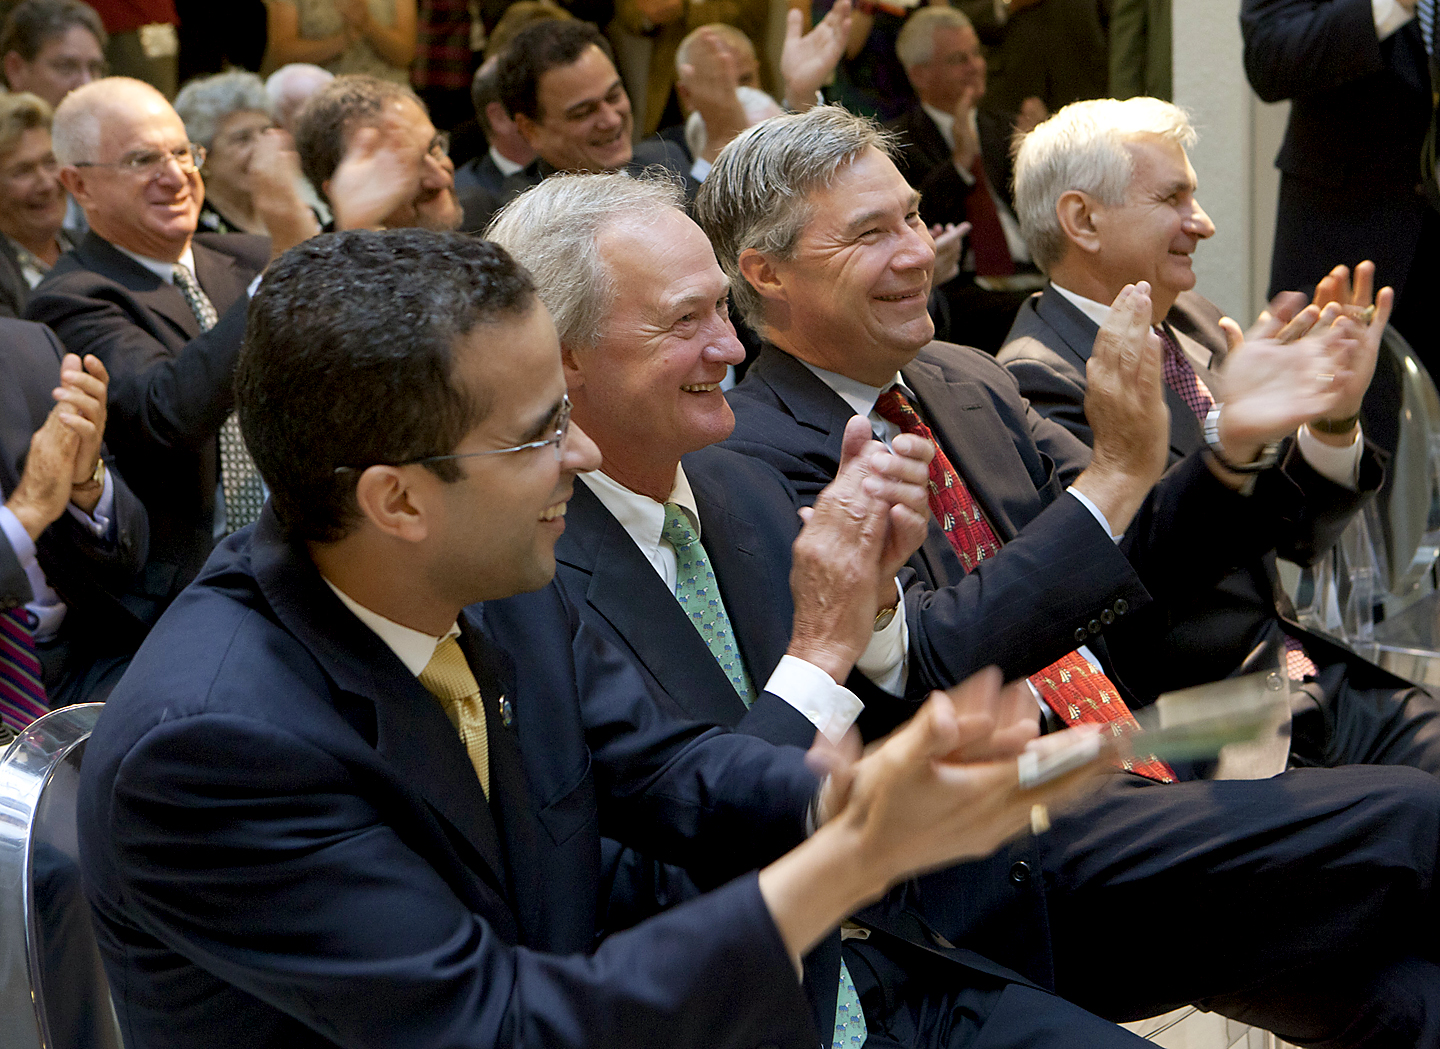 A big day for Brown, Providence, Rhode Island: Mayor Angel Taveras, Gov. Lincoln Chafee, and Sens. Sheldon Whitehouse and Jack Reed cheer President Ruth Simmons at the grand opening. Credit: Mike Cohea/Brown University